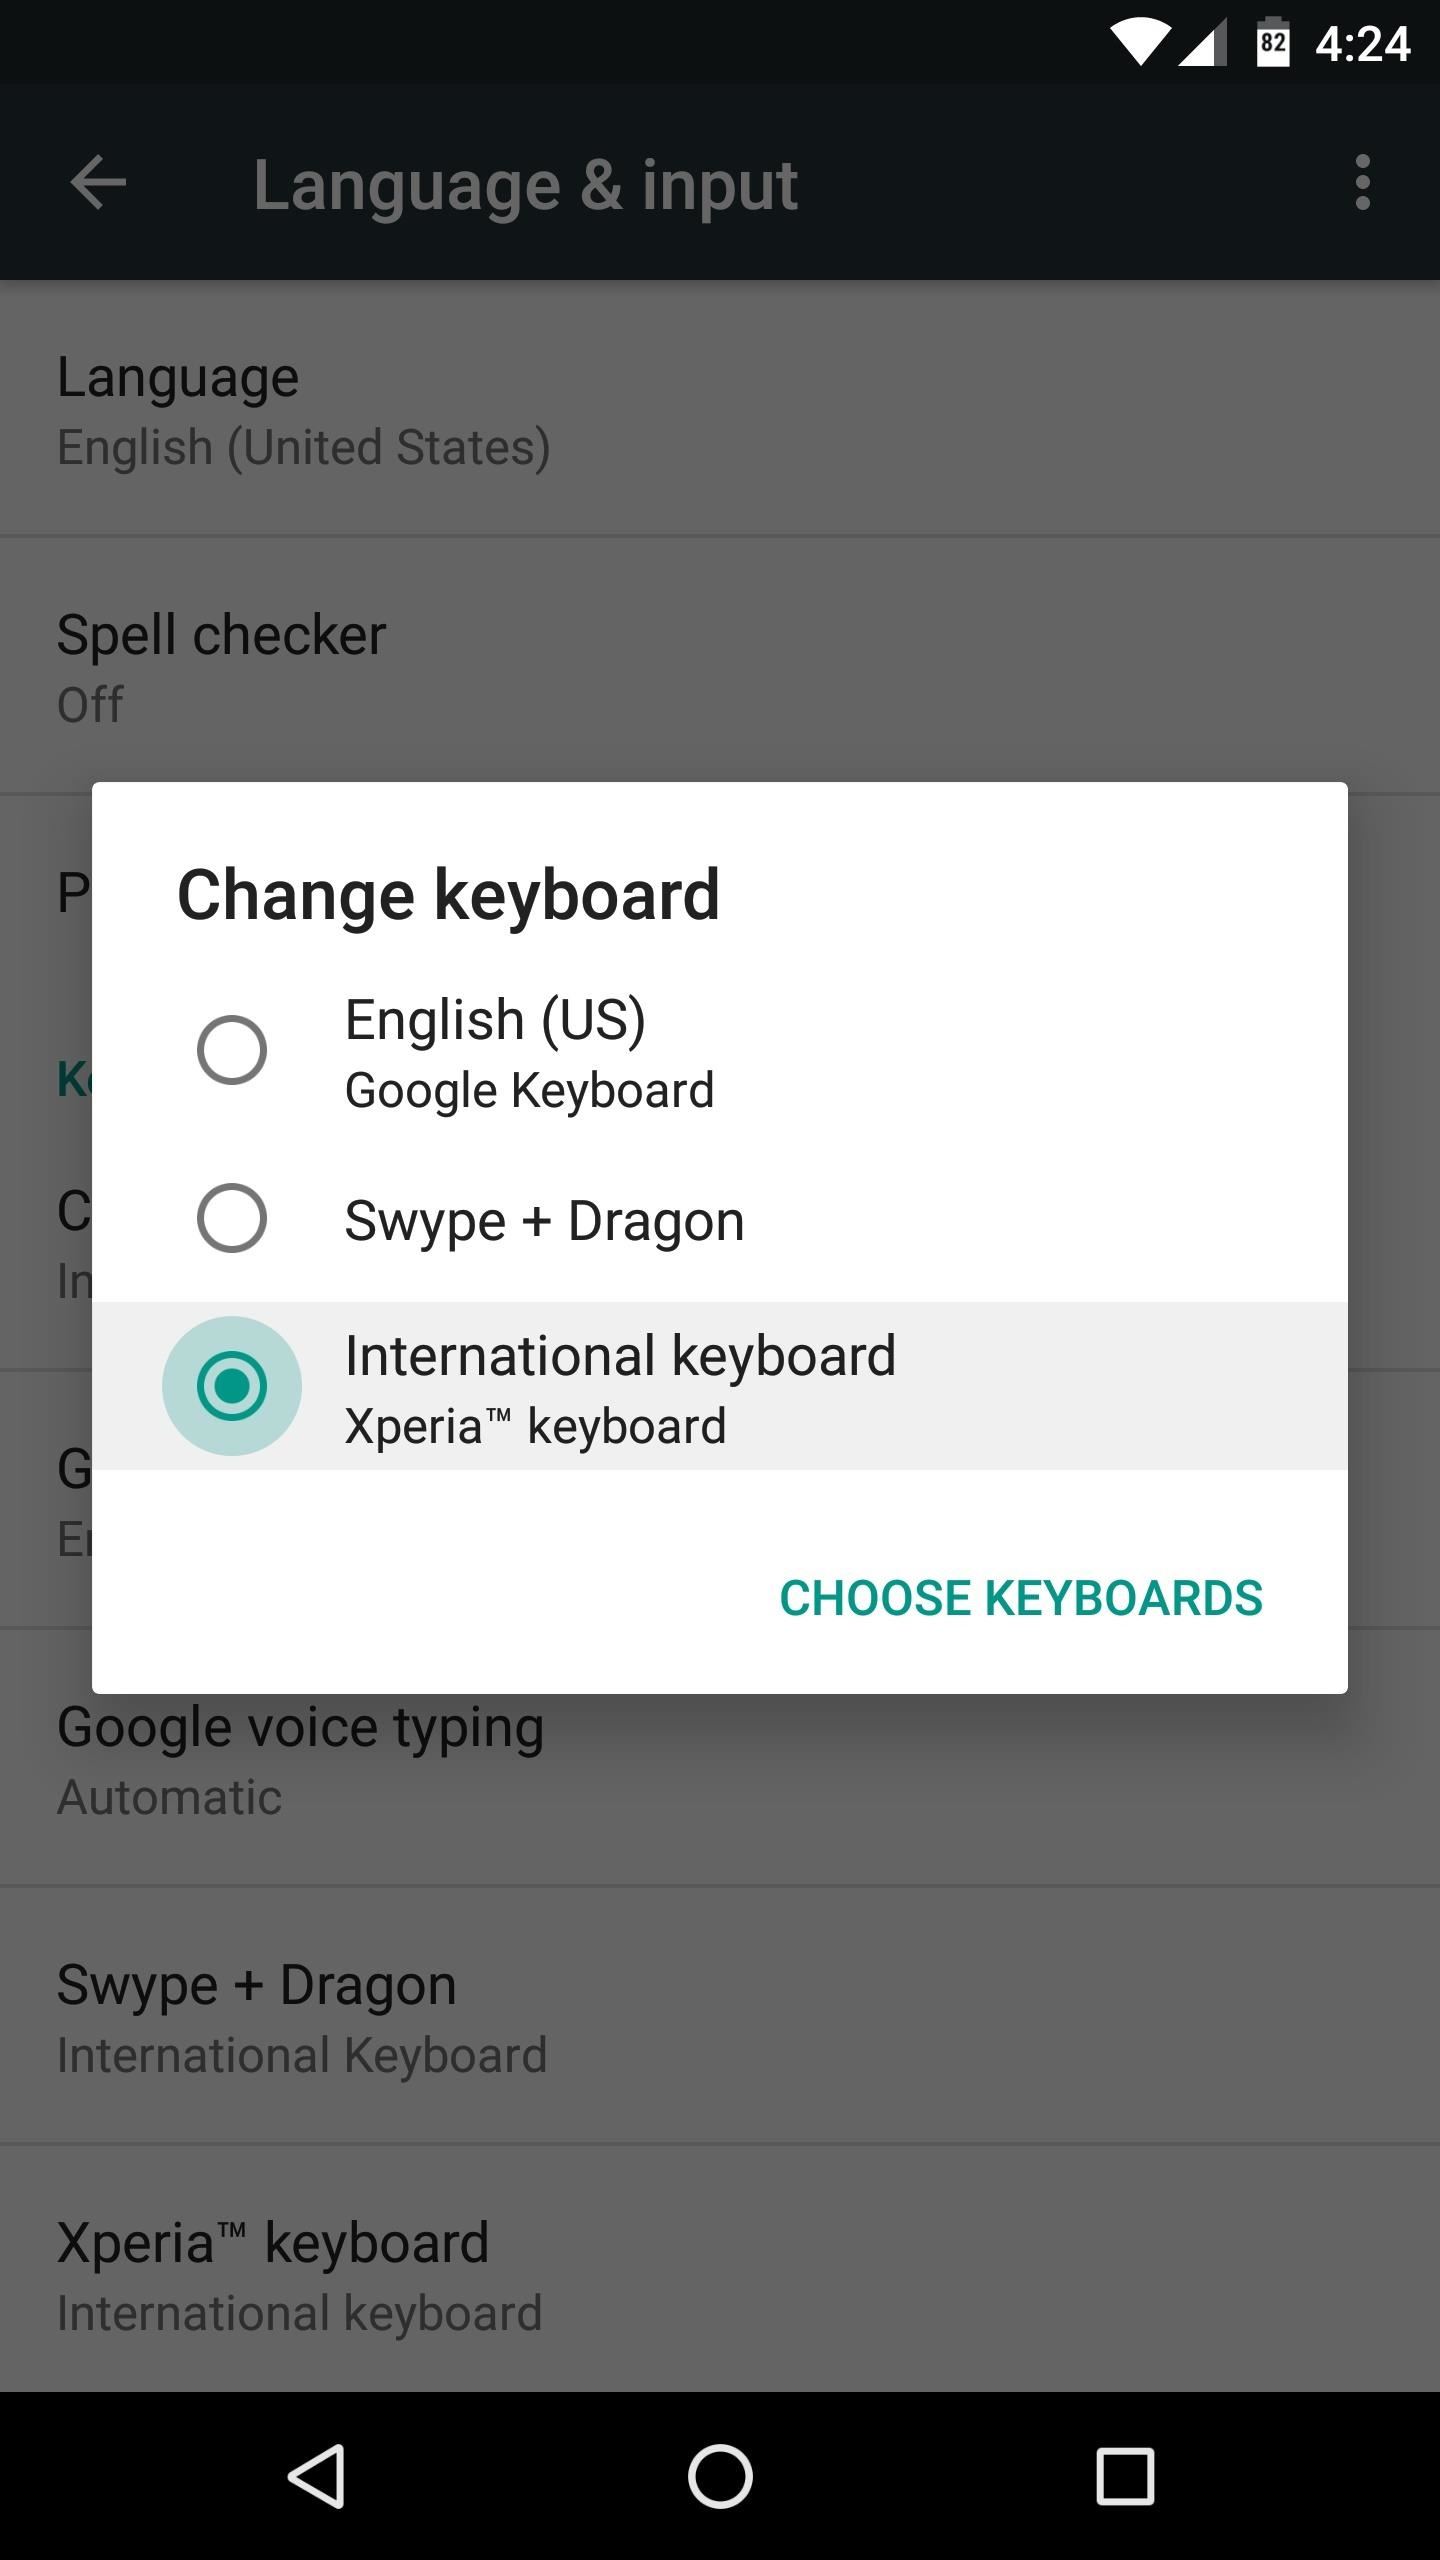 Get Sony's Feature-Packed Xperia Keyboard on Any Android Device